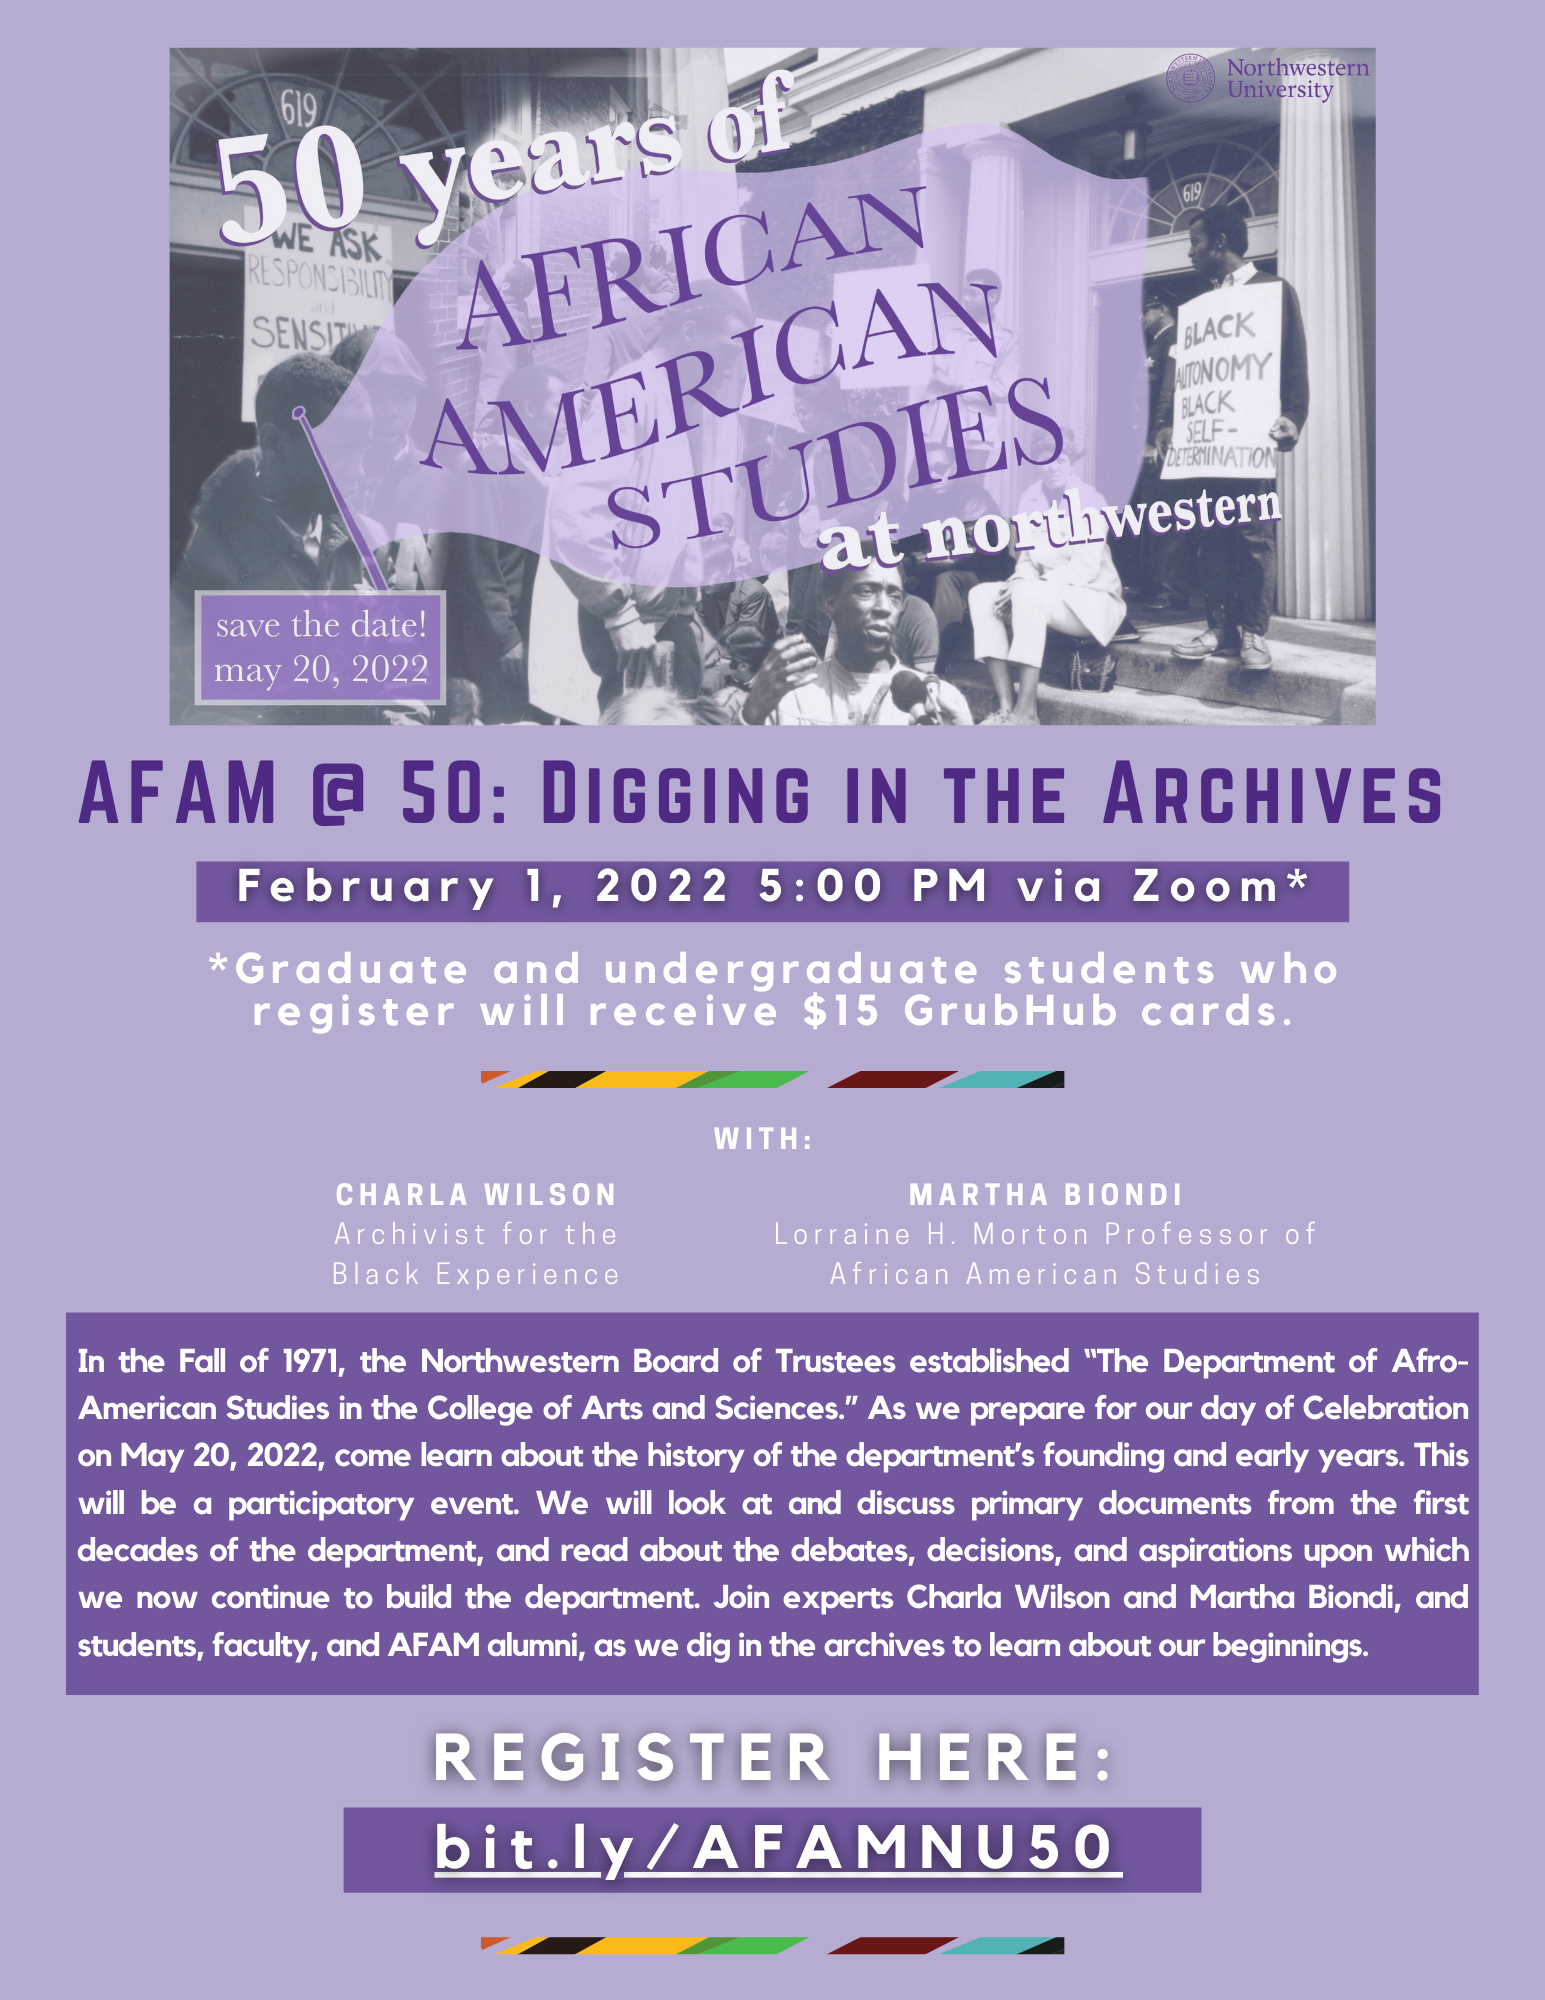 afam50-digging-in-the-archives-feb-1.png